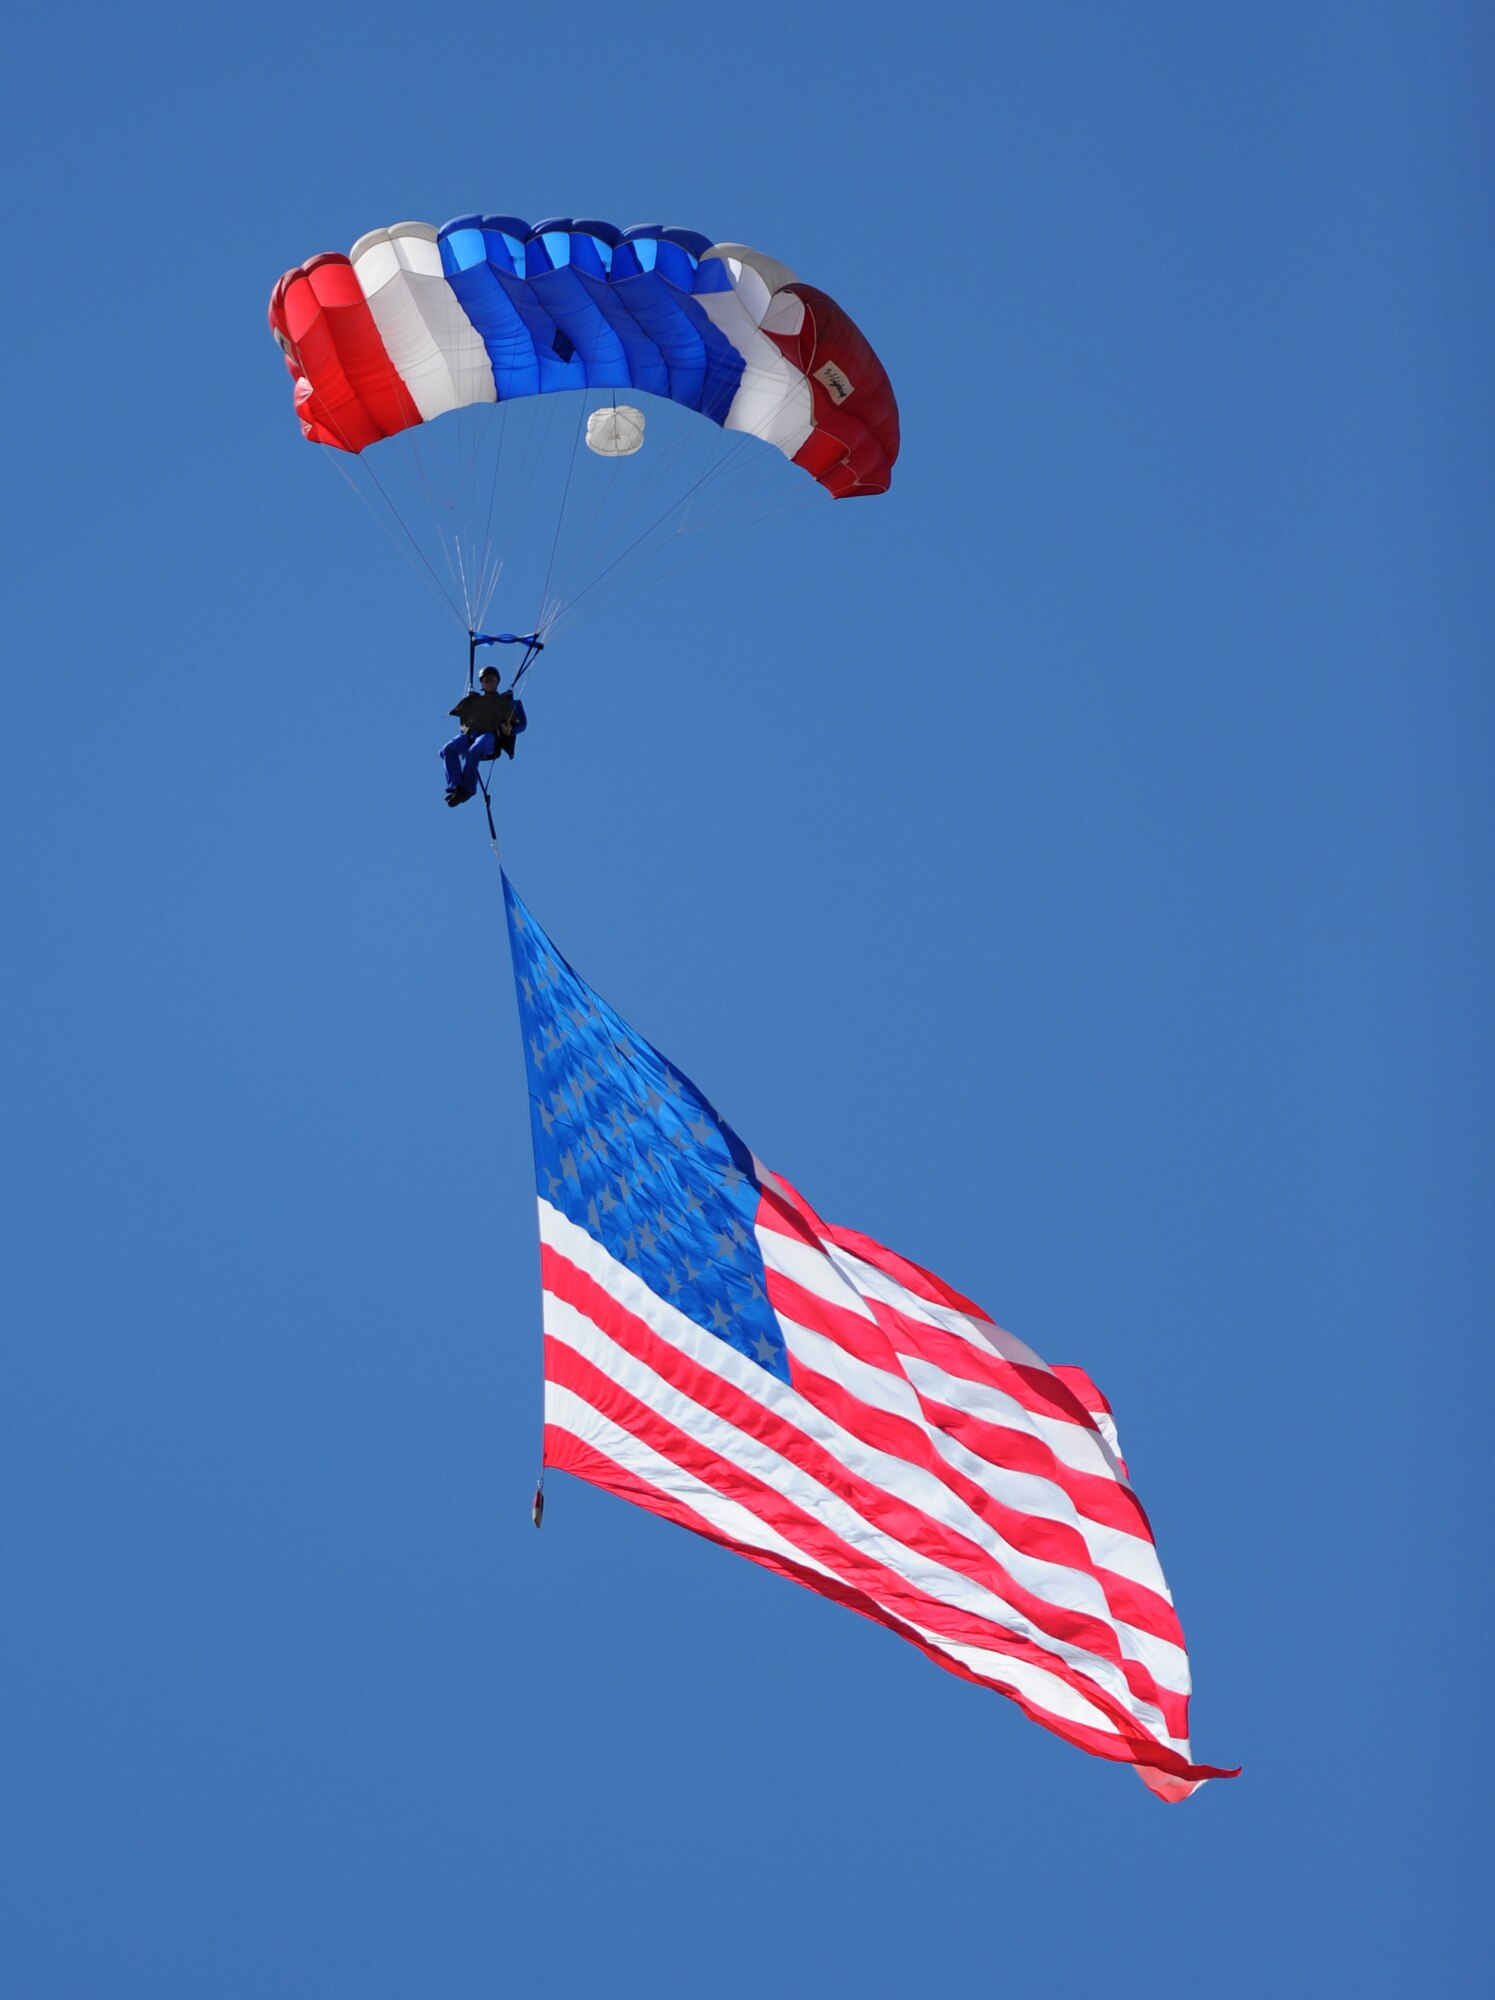 Parachutist Kent Lane carries the Stars and Stripes during the opening ceremonies of the Capital City Air Show at Mather Airport, Sacramento, Calif., Sept. 8, 2012. Lane started skydiving in1976 and has more than 800 jumps in competition and exhibition. (U.S. Air Force photo by Airman 1st Class Andrew Buchanan)